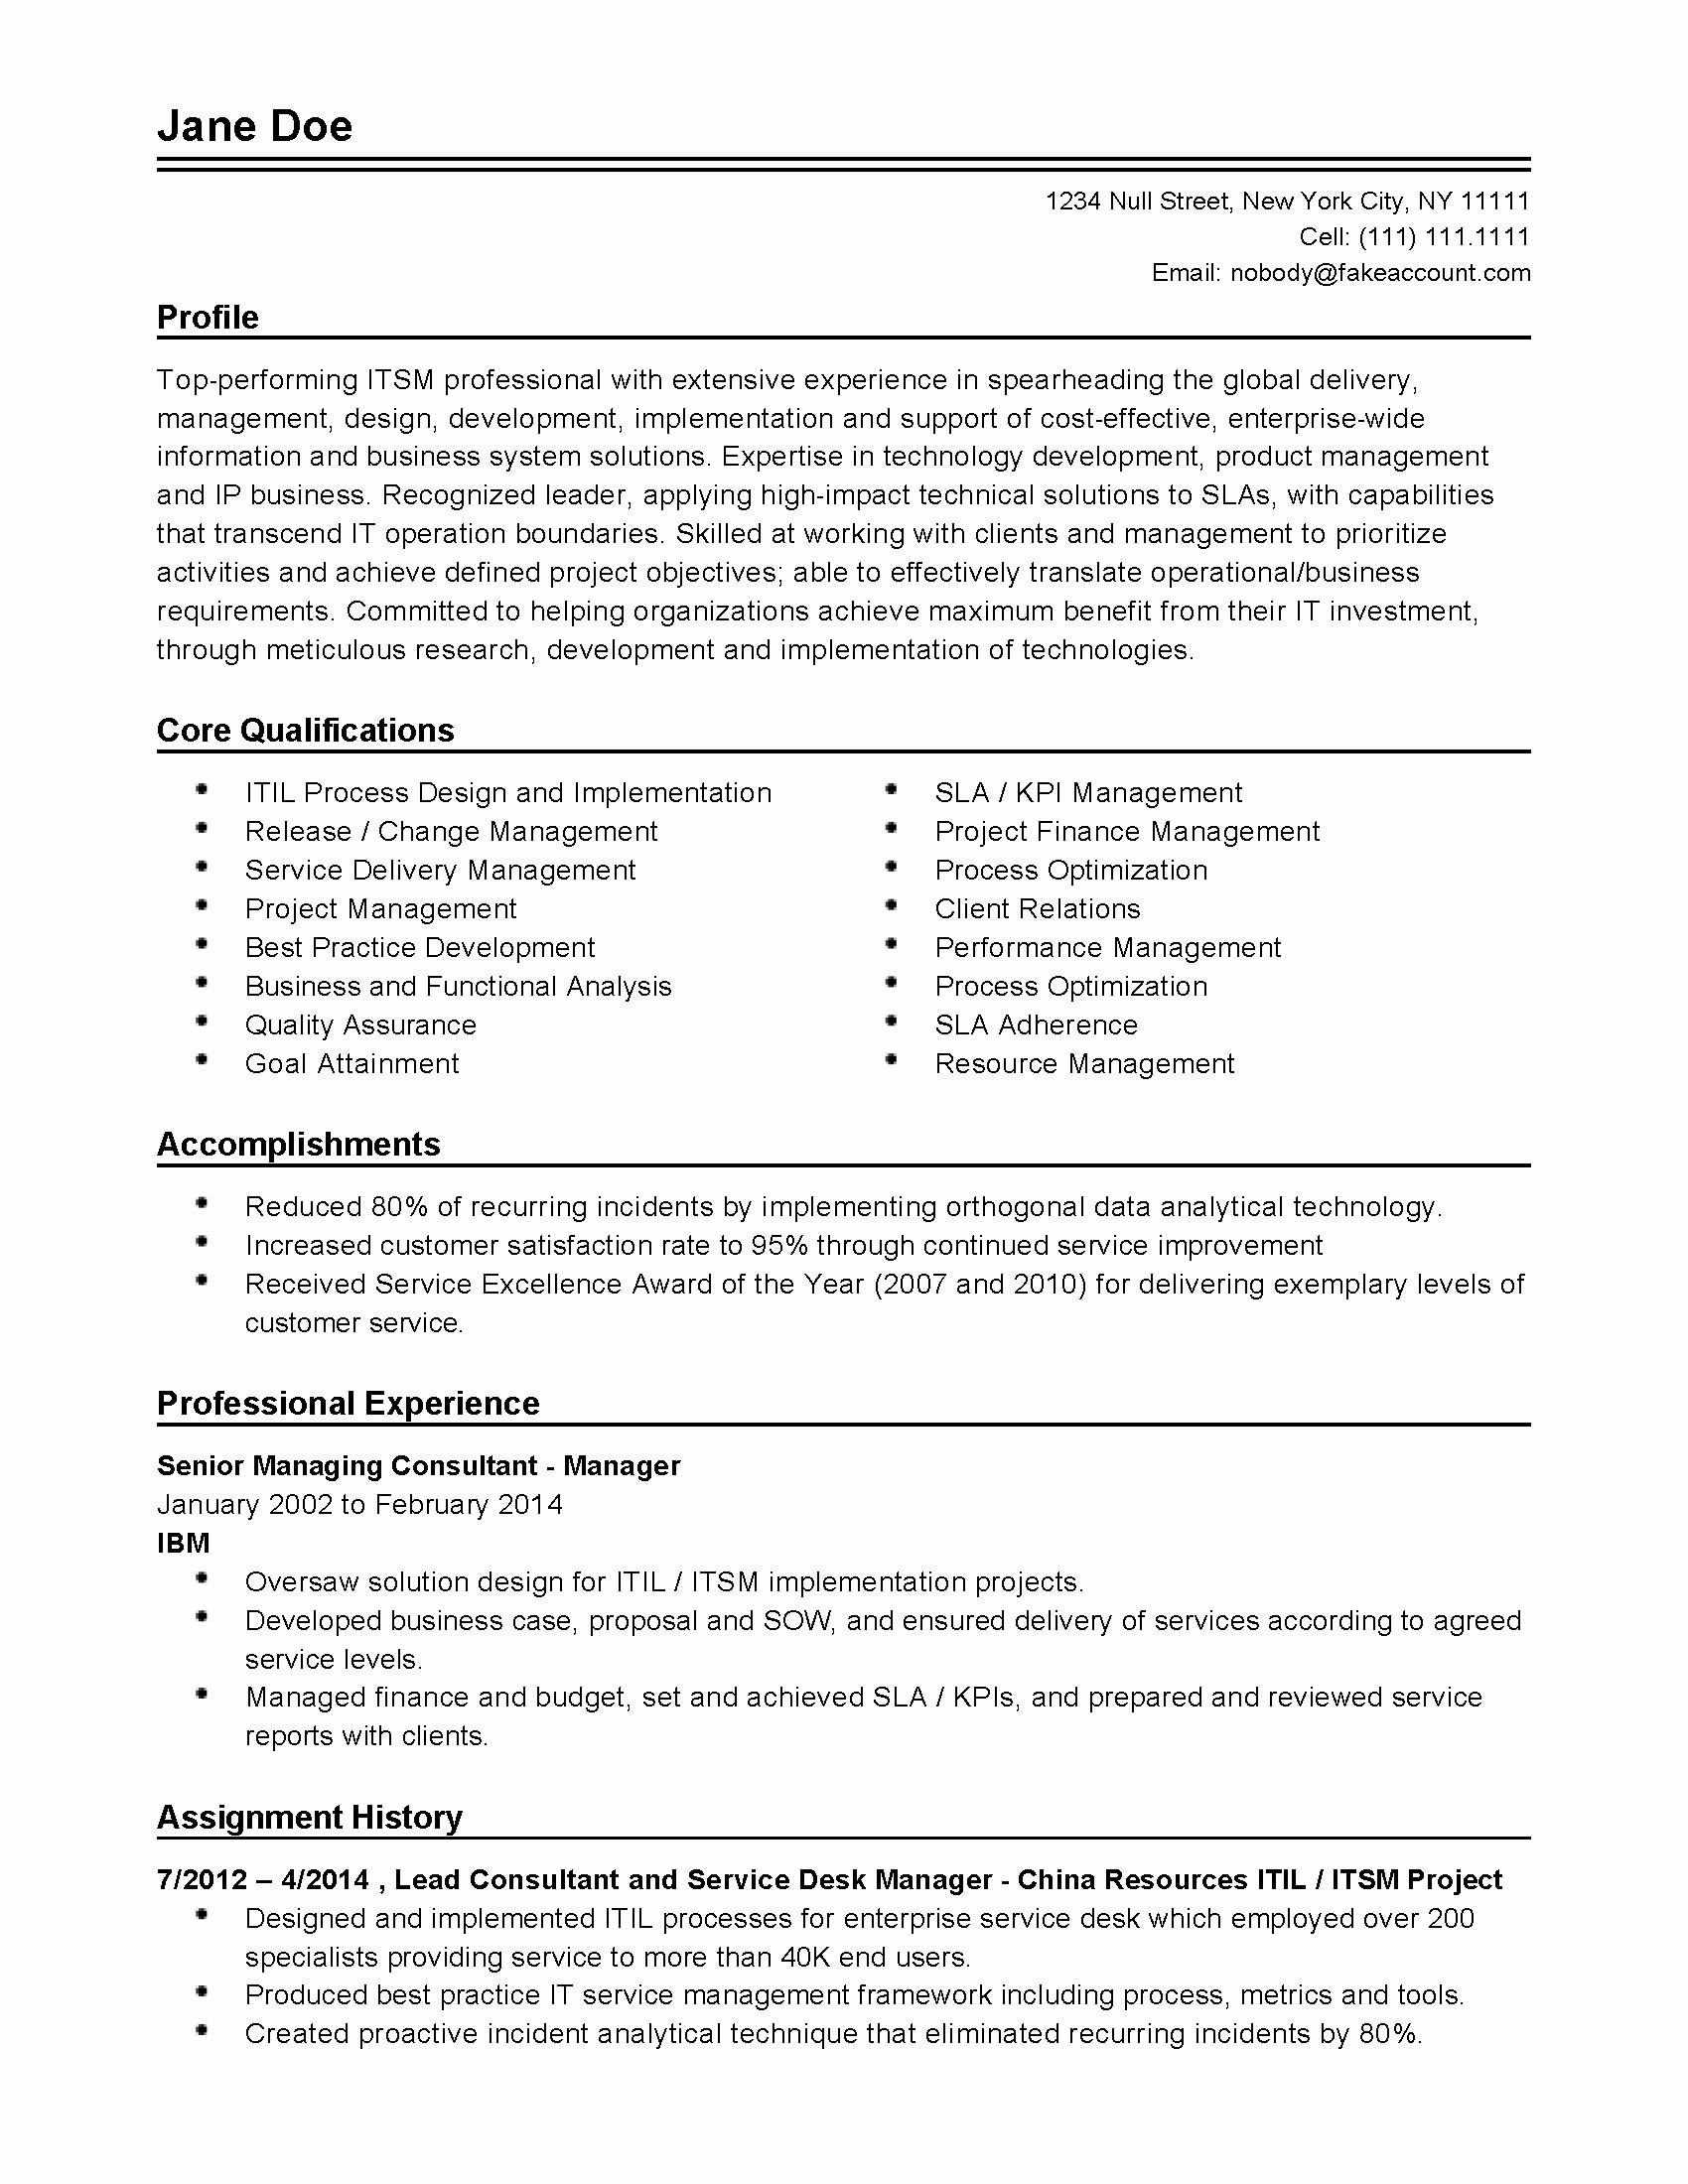 Resume for Letter Of Recommendation Template - Resume and Cover Letter Template Inspirational Resume and Cover